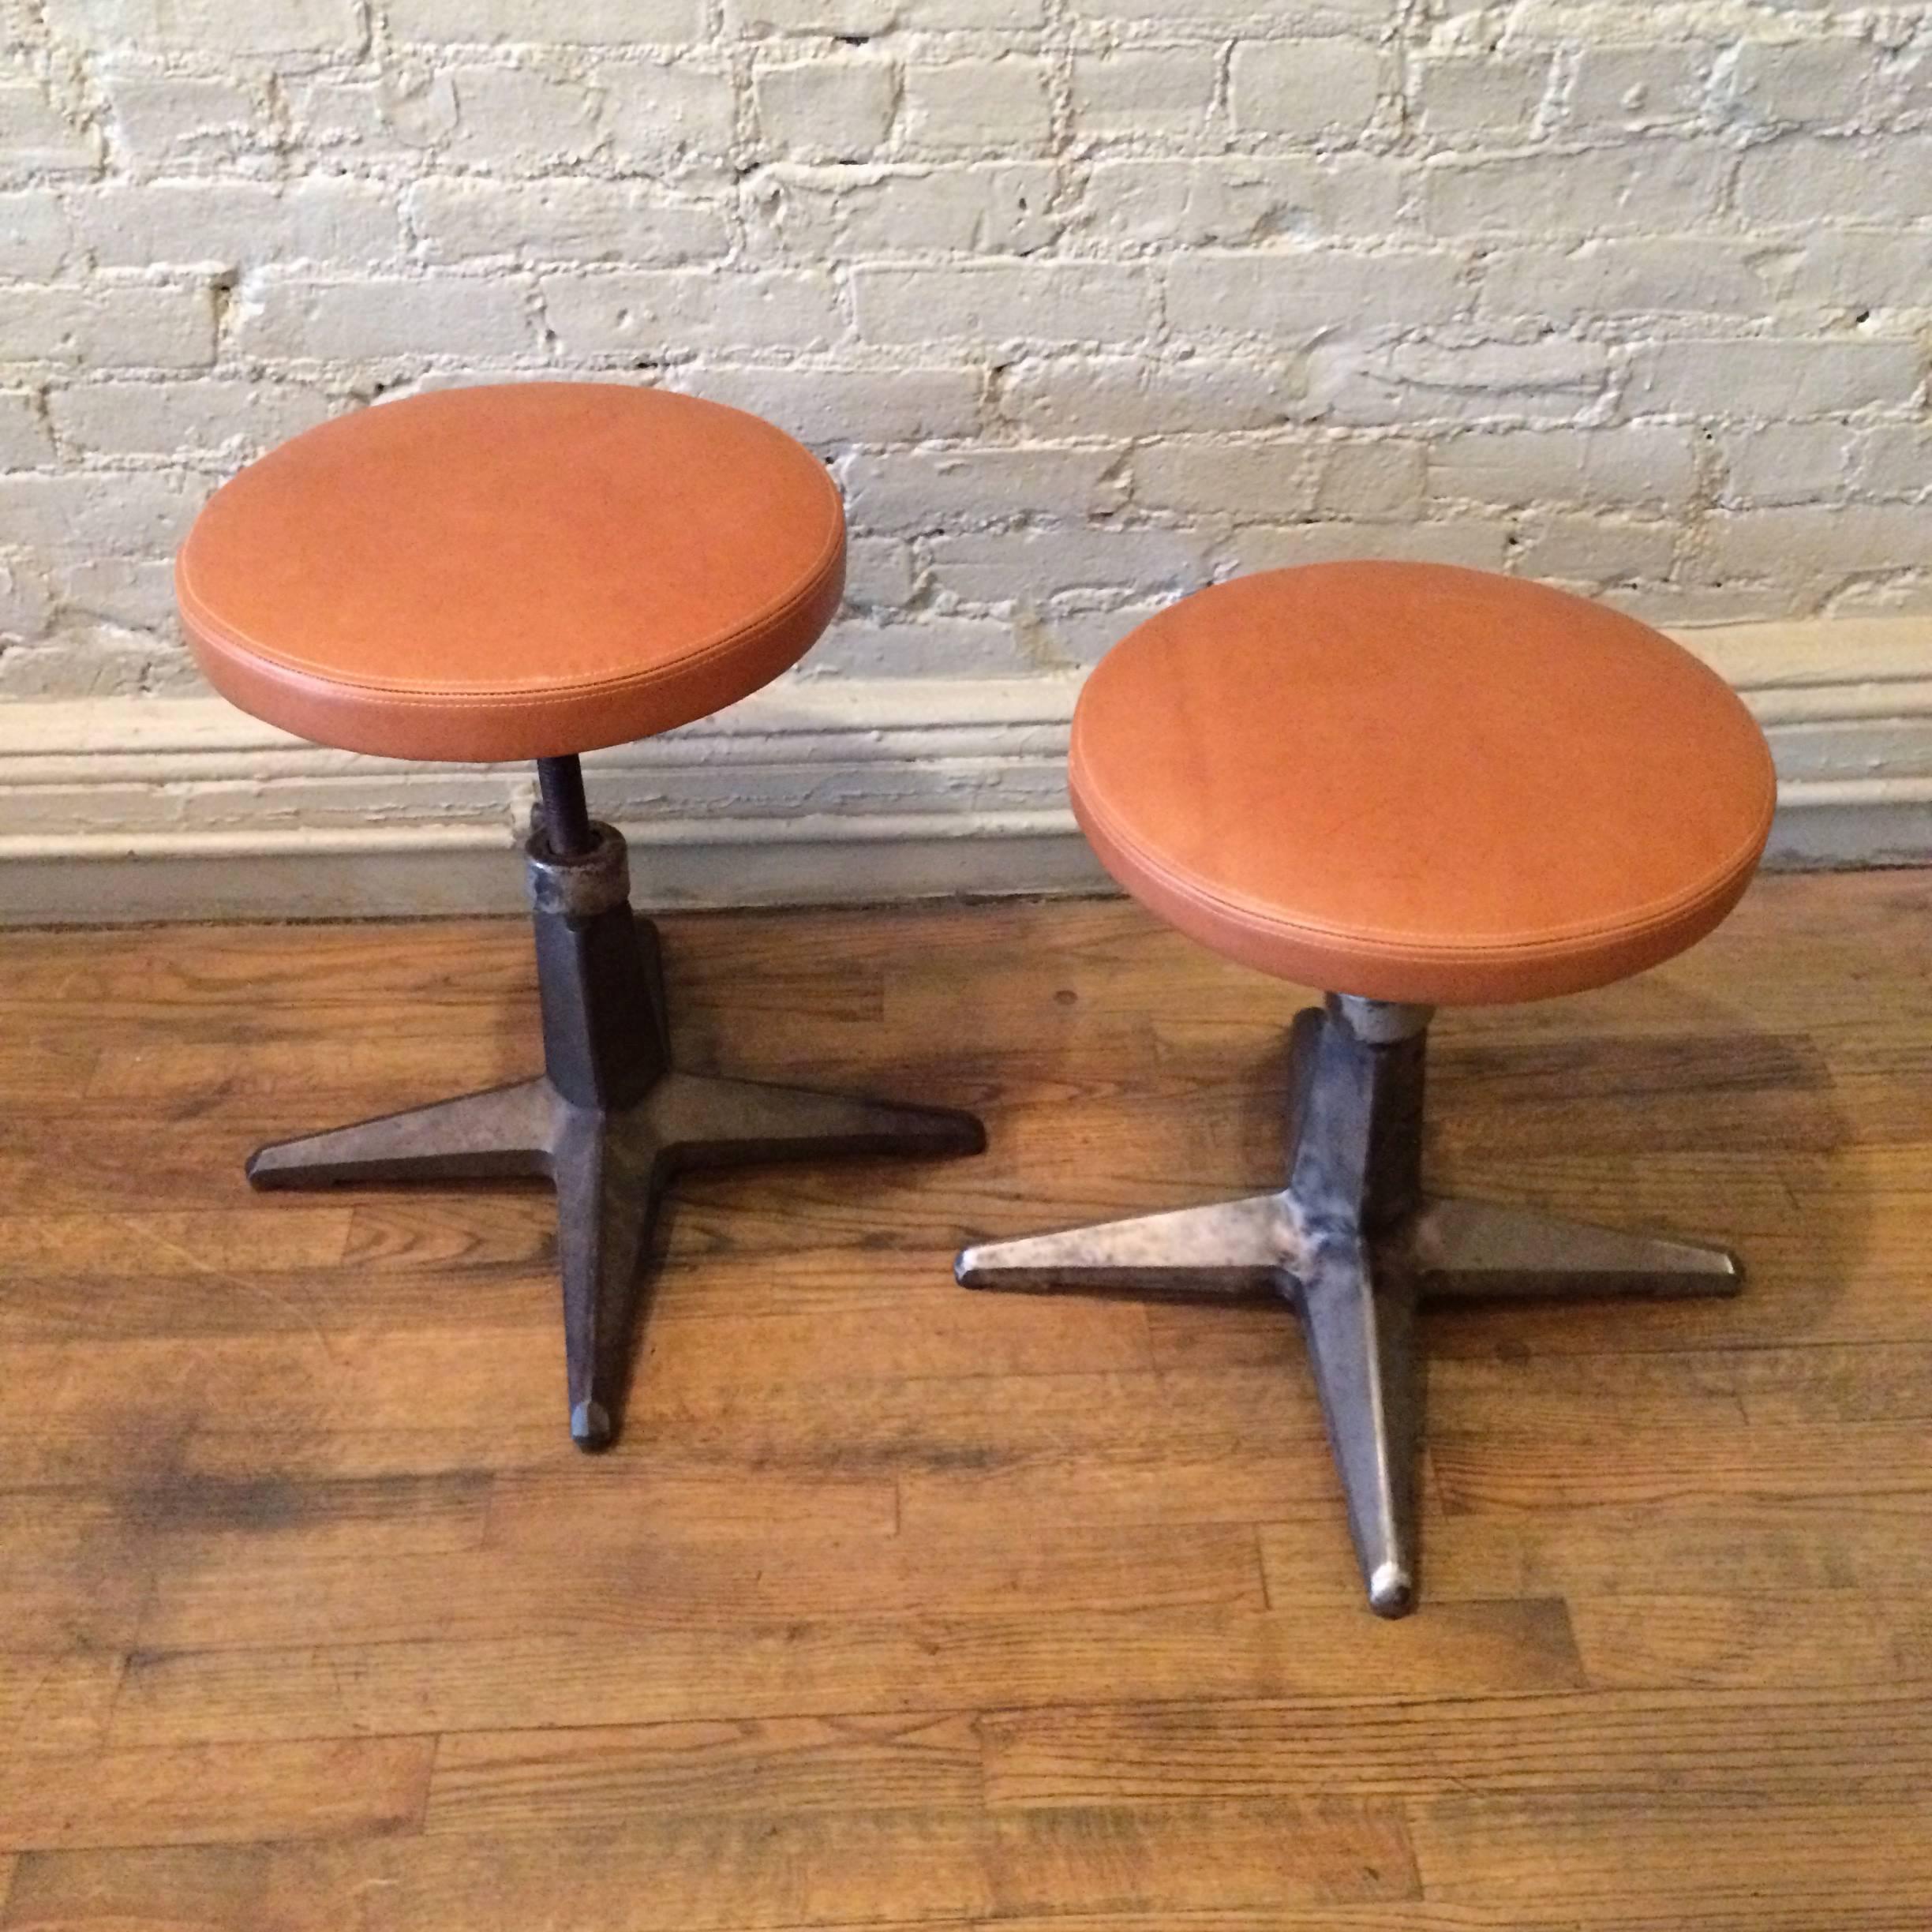 American Pair Of Industrial Cast Iron Adjustable Stools with Leather Seats